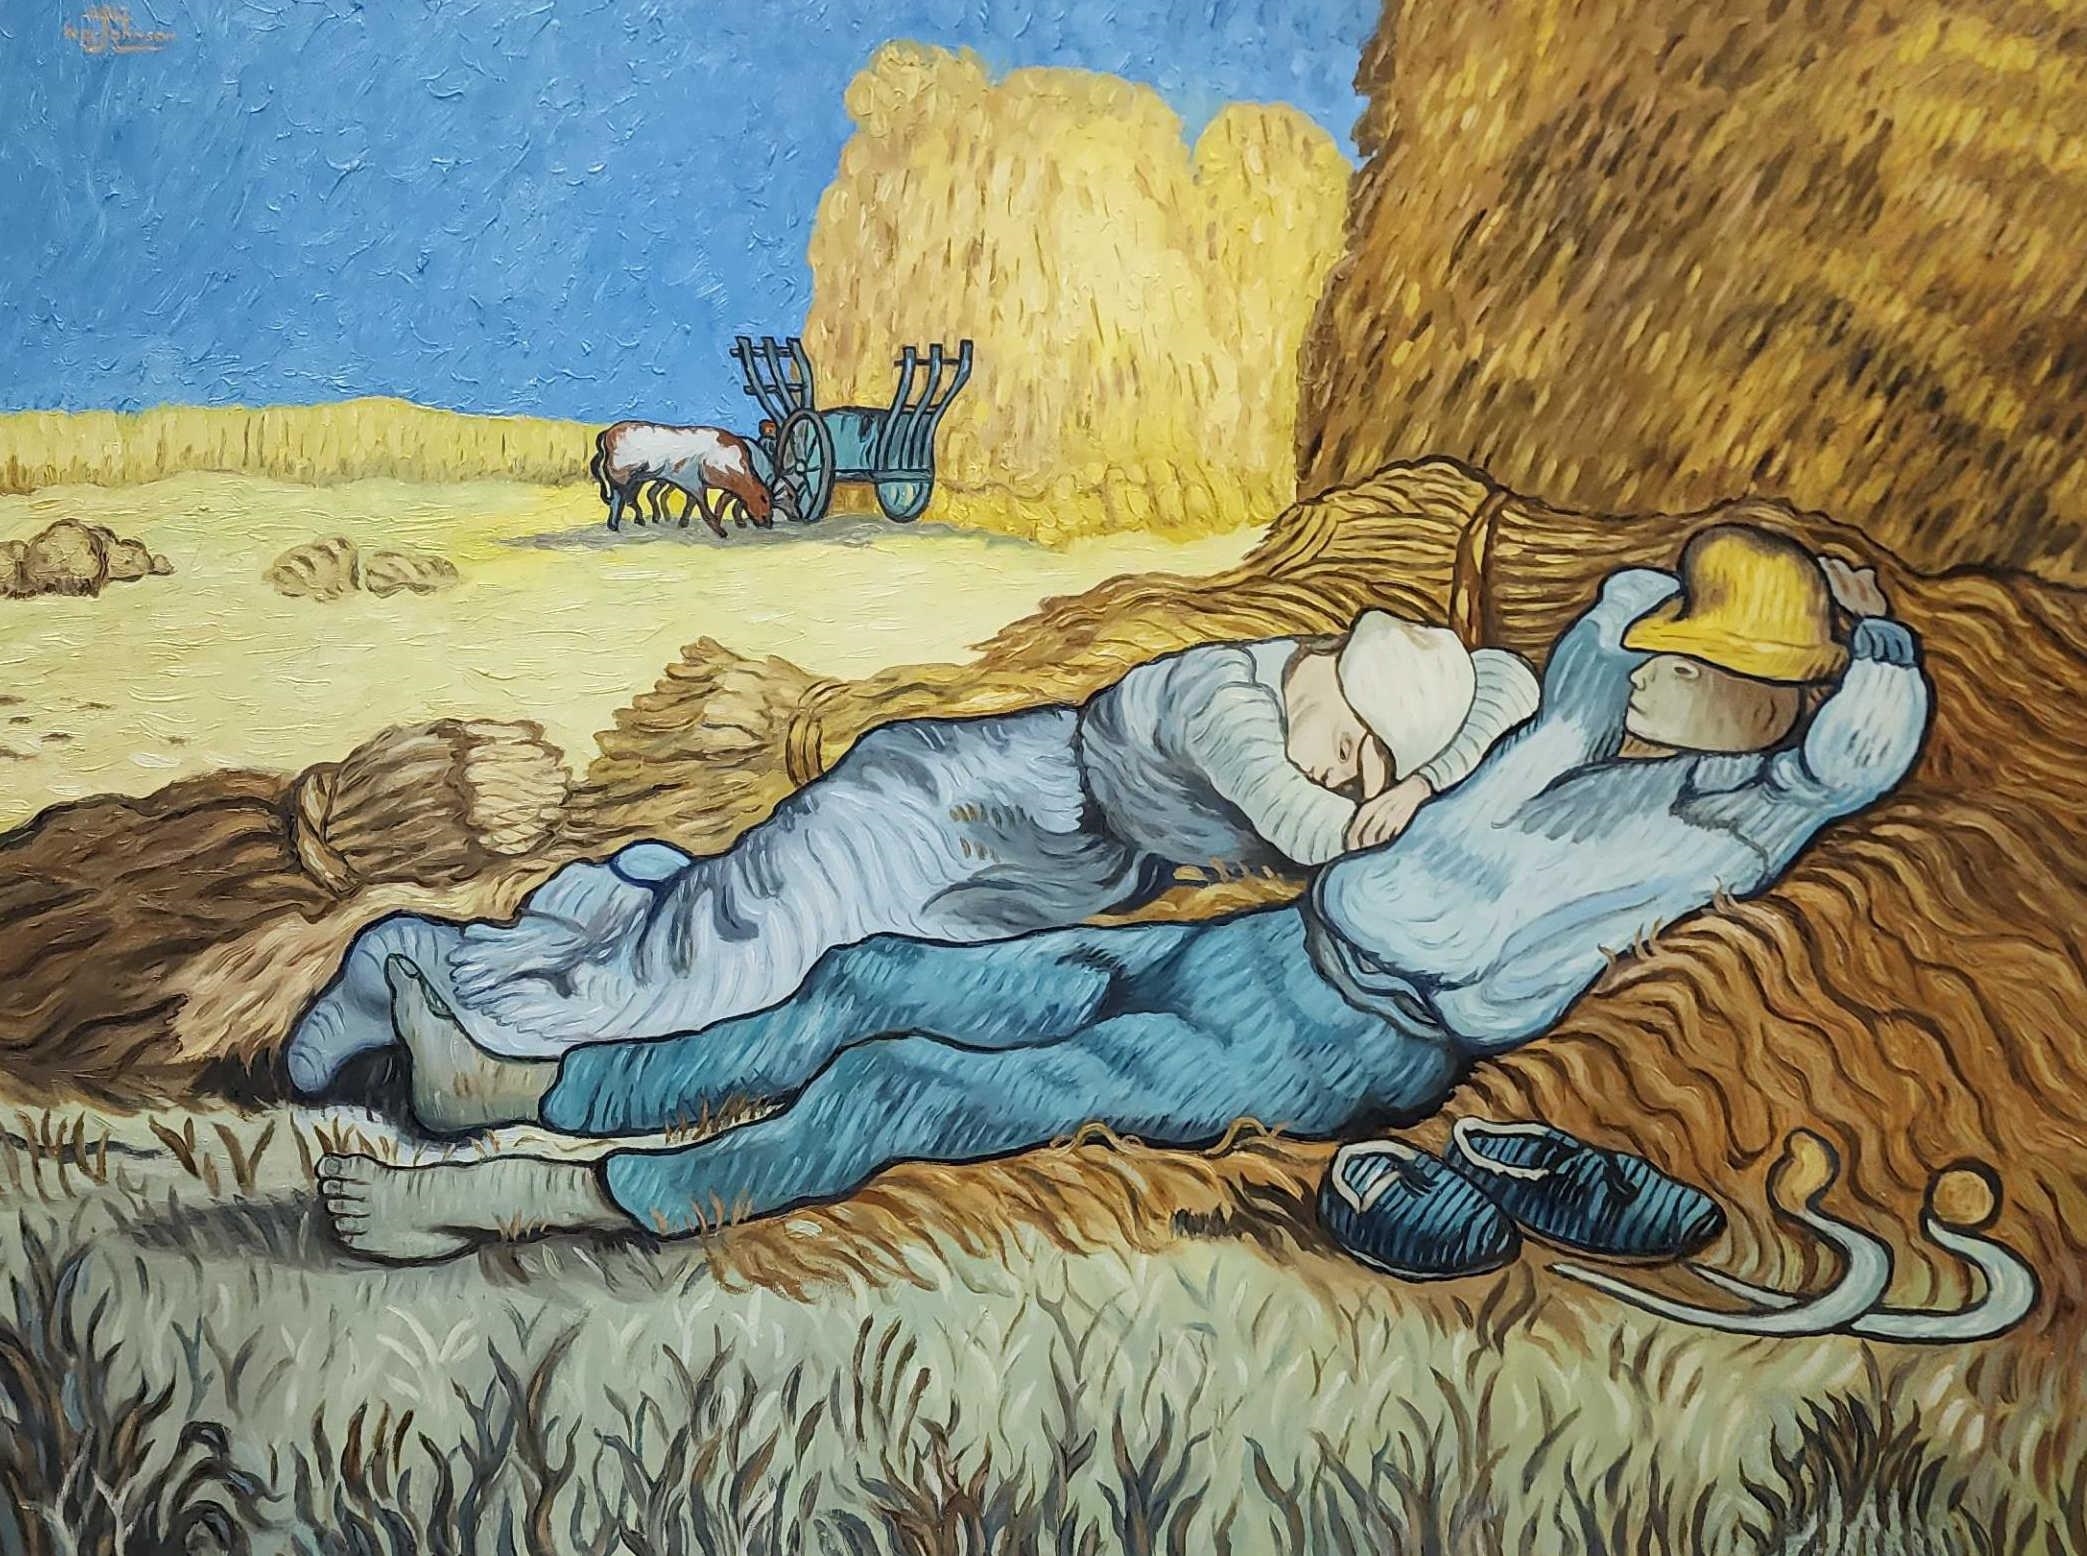 Painting Of Vincent Van Gogh's " The Rest Or The Siesta". by Vincent van Gogh, 2017